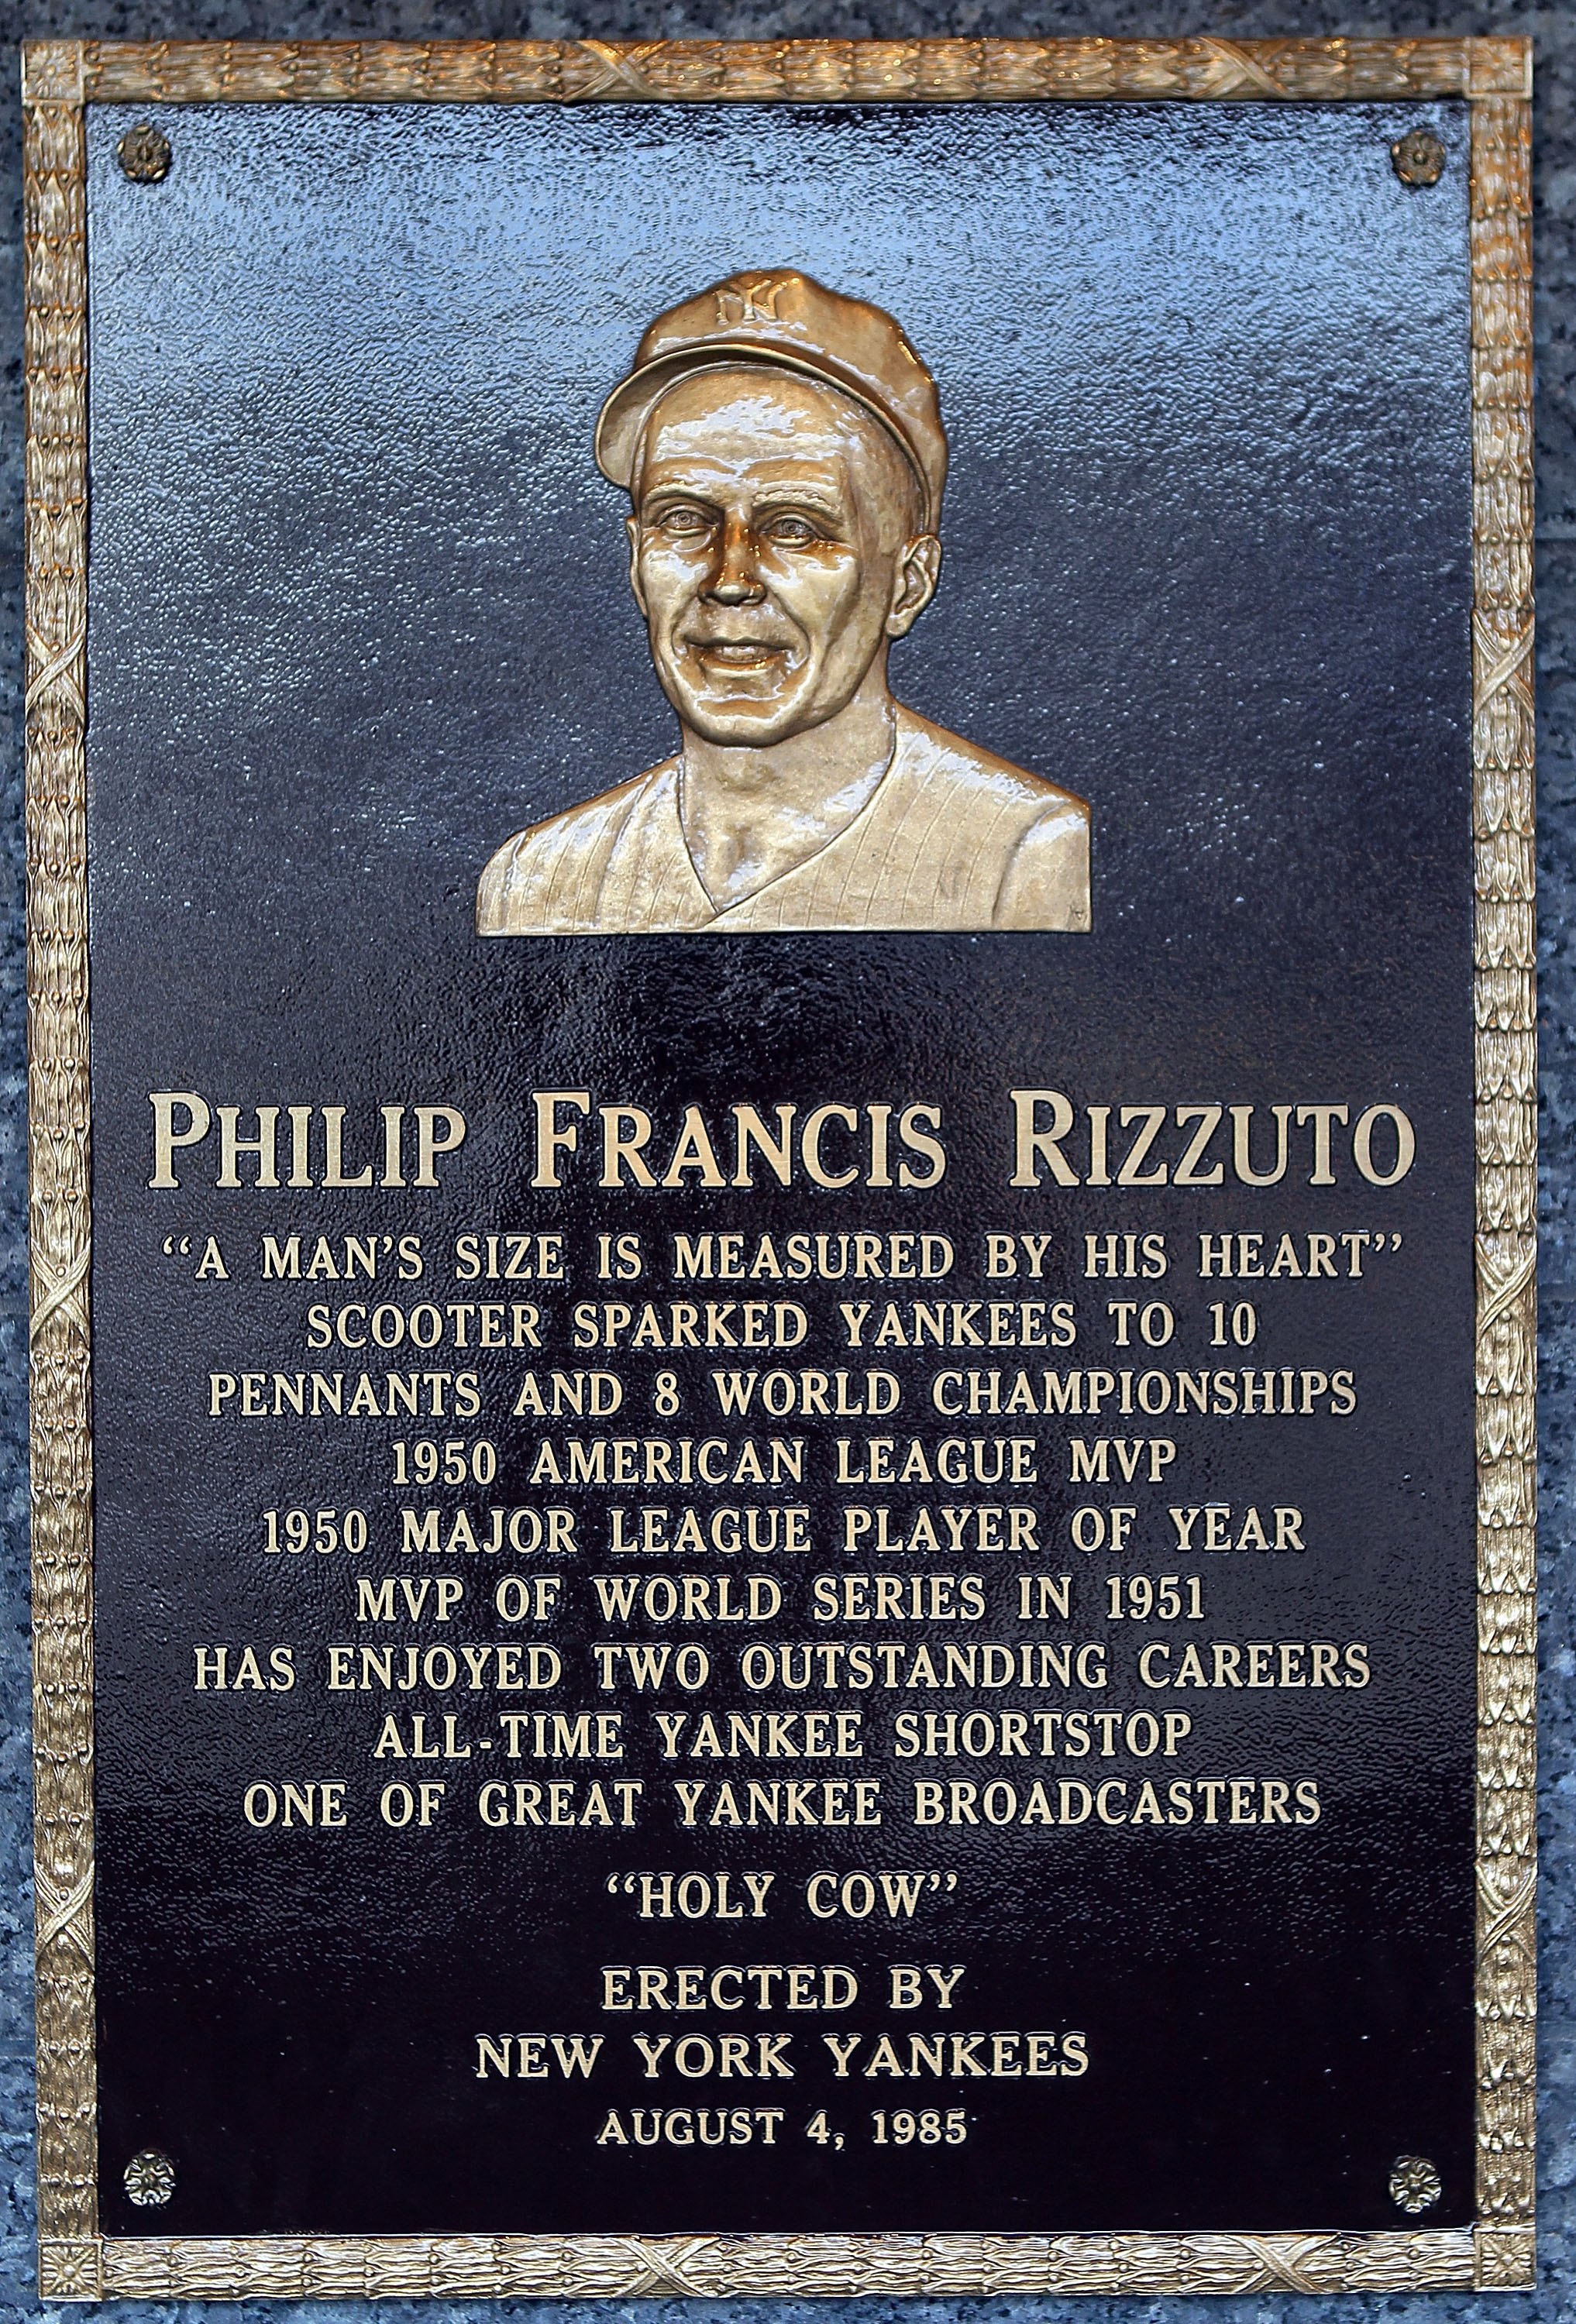 NEW YORK - MAY 02:  The plaque of Phil Rizzuto is seen in Monument Park at Yankee Stadium prior to the game between the New York Yankees and the Chicago White Sox on May 2, 2010 in the Bronx borough of New York City. The Yankees defeated the White Sox 12-